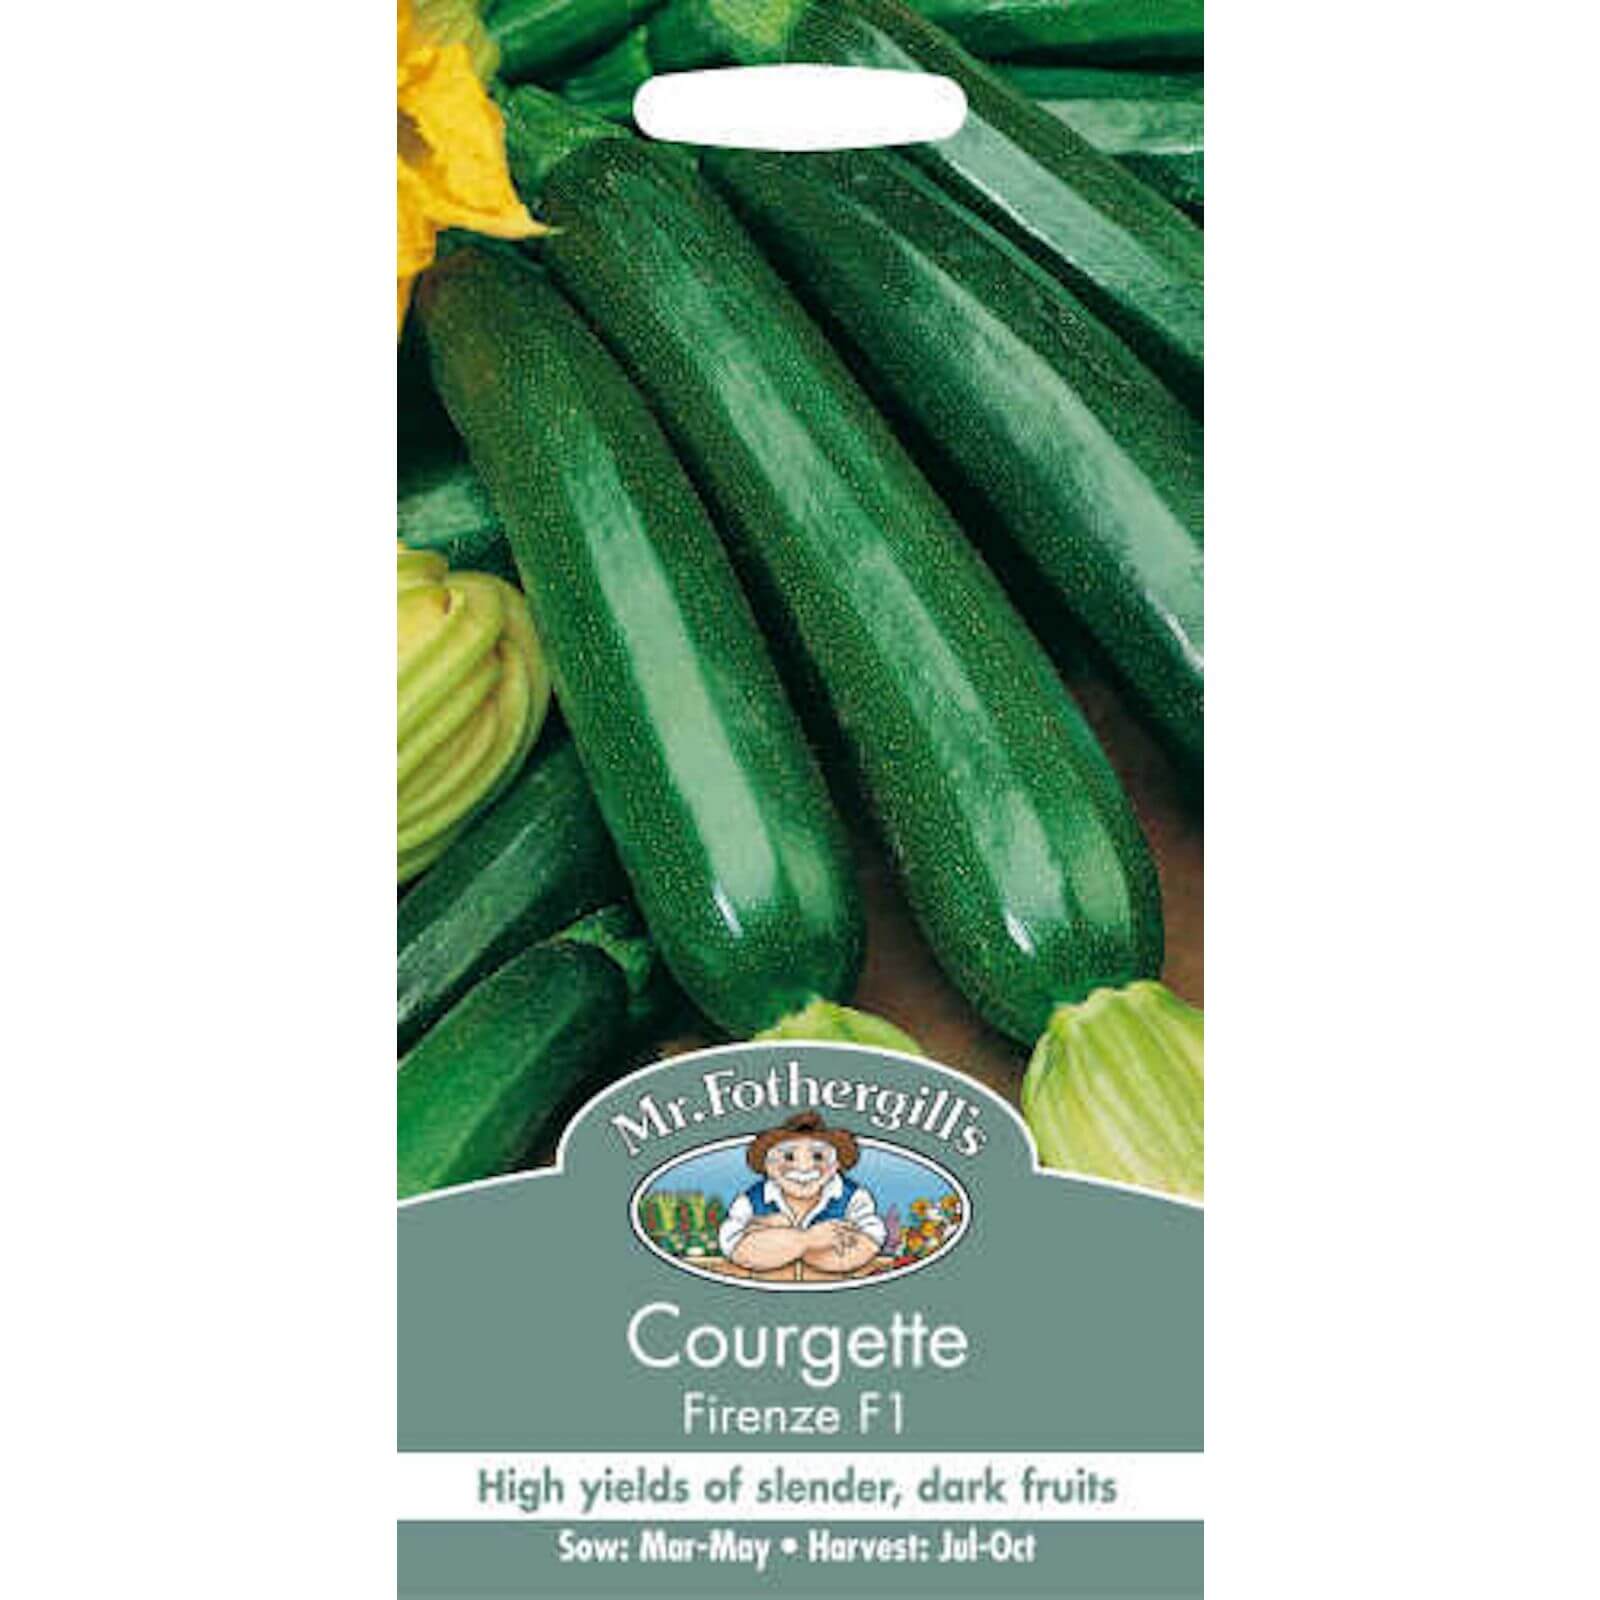 Mr. Fothergill's Courgette Firenze F1 Vegetable Seeds